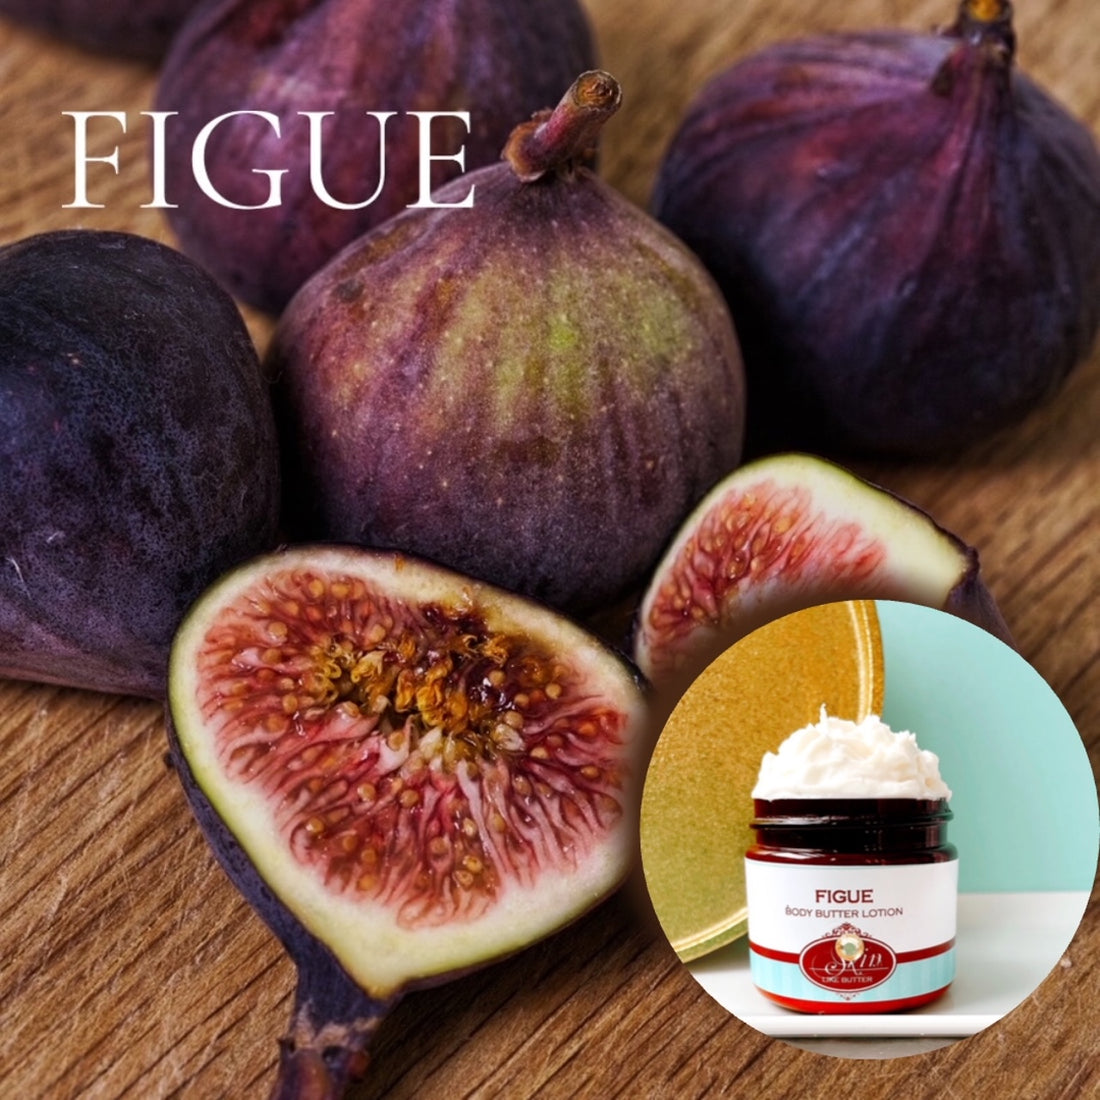 FIGUE scented Body Butter in an amber  2, 4, 8, or 16 oz bottle or jar